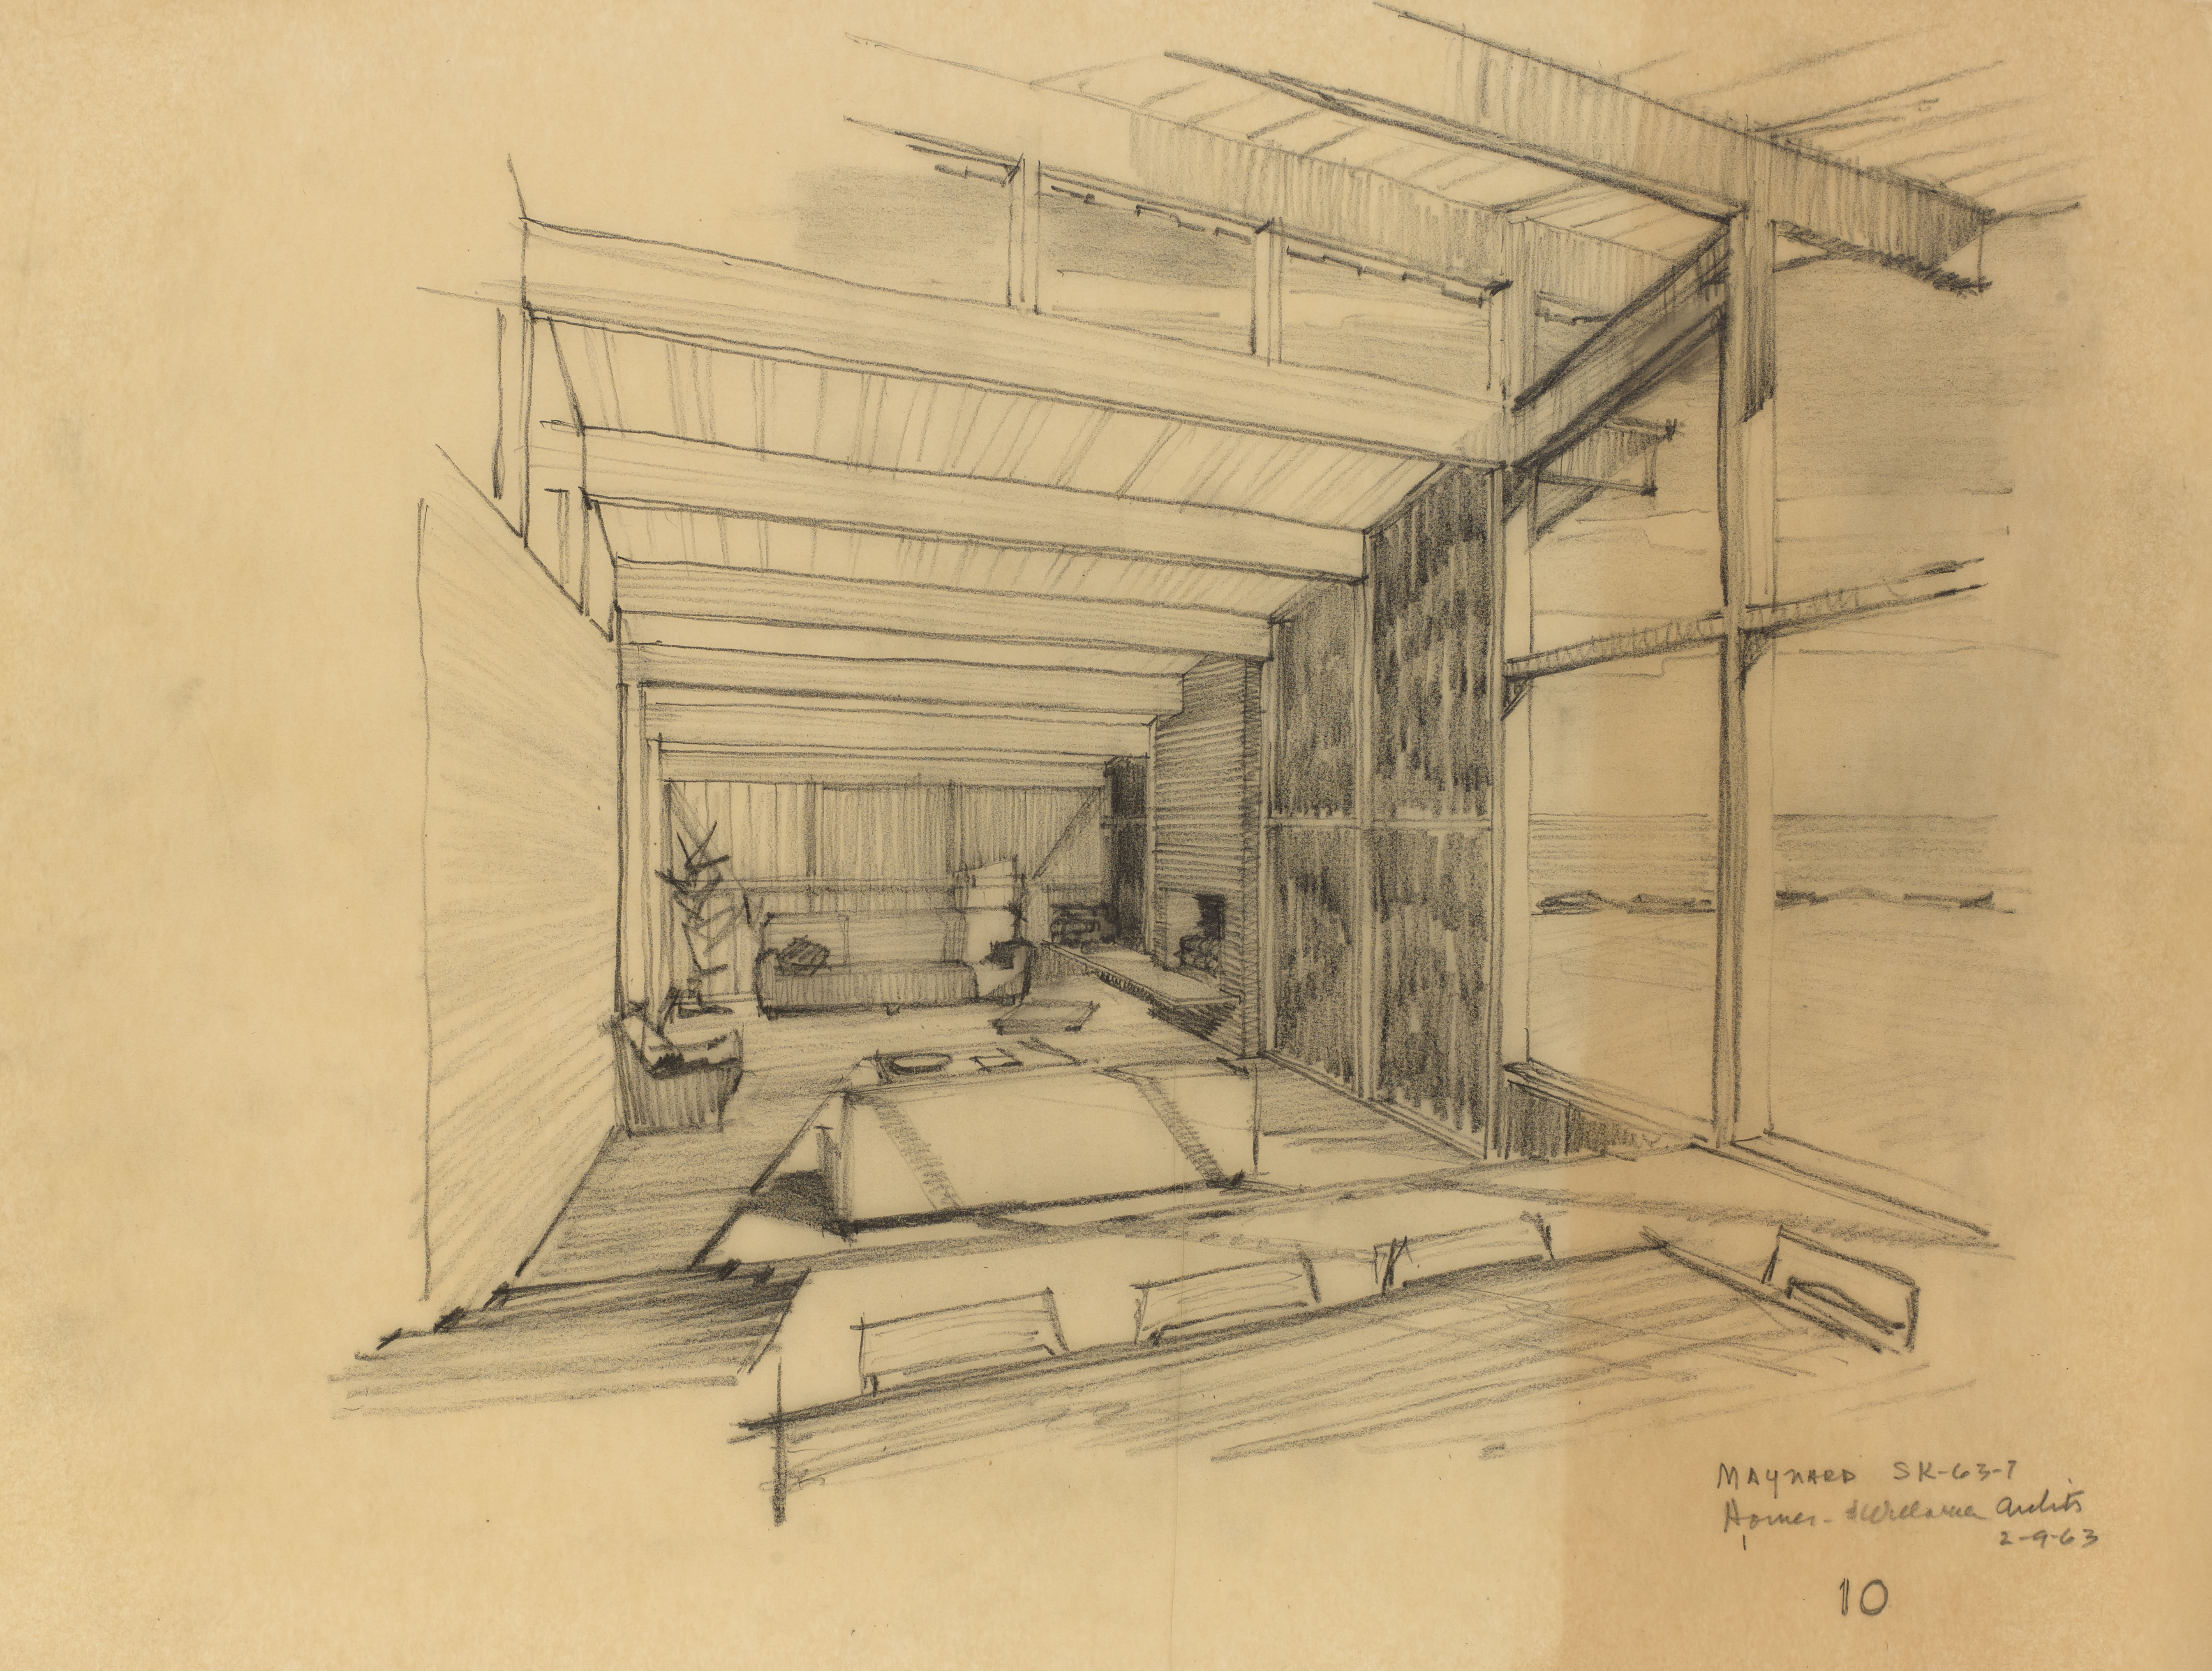 EPM SK-063-7 10 Untitled Interior, 1963, graphite on tracing paper, 16 x 23 inches